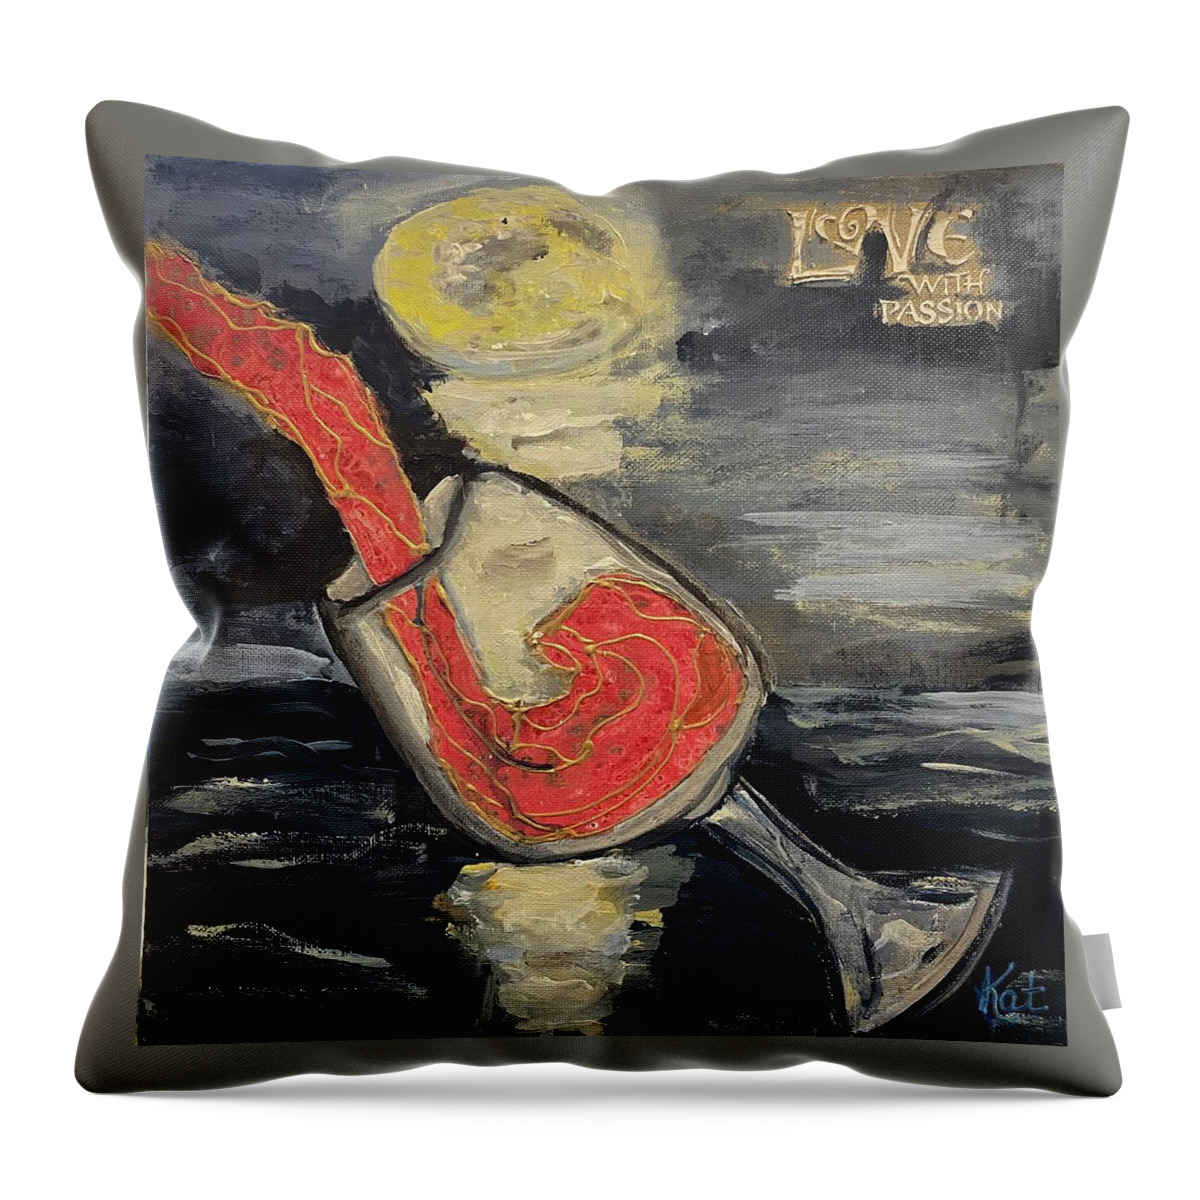 Wine Moon Love Passion Sky Throw Pillow featuring the painting Love With Passion by Kathy Bee